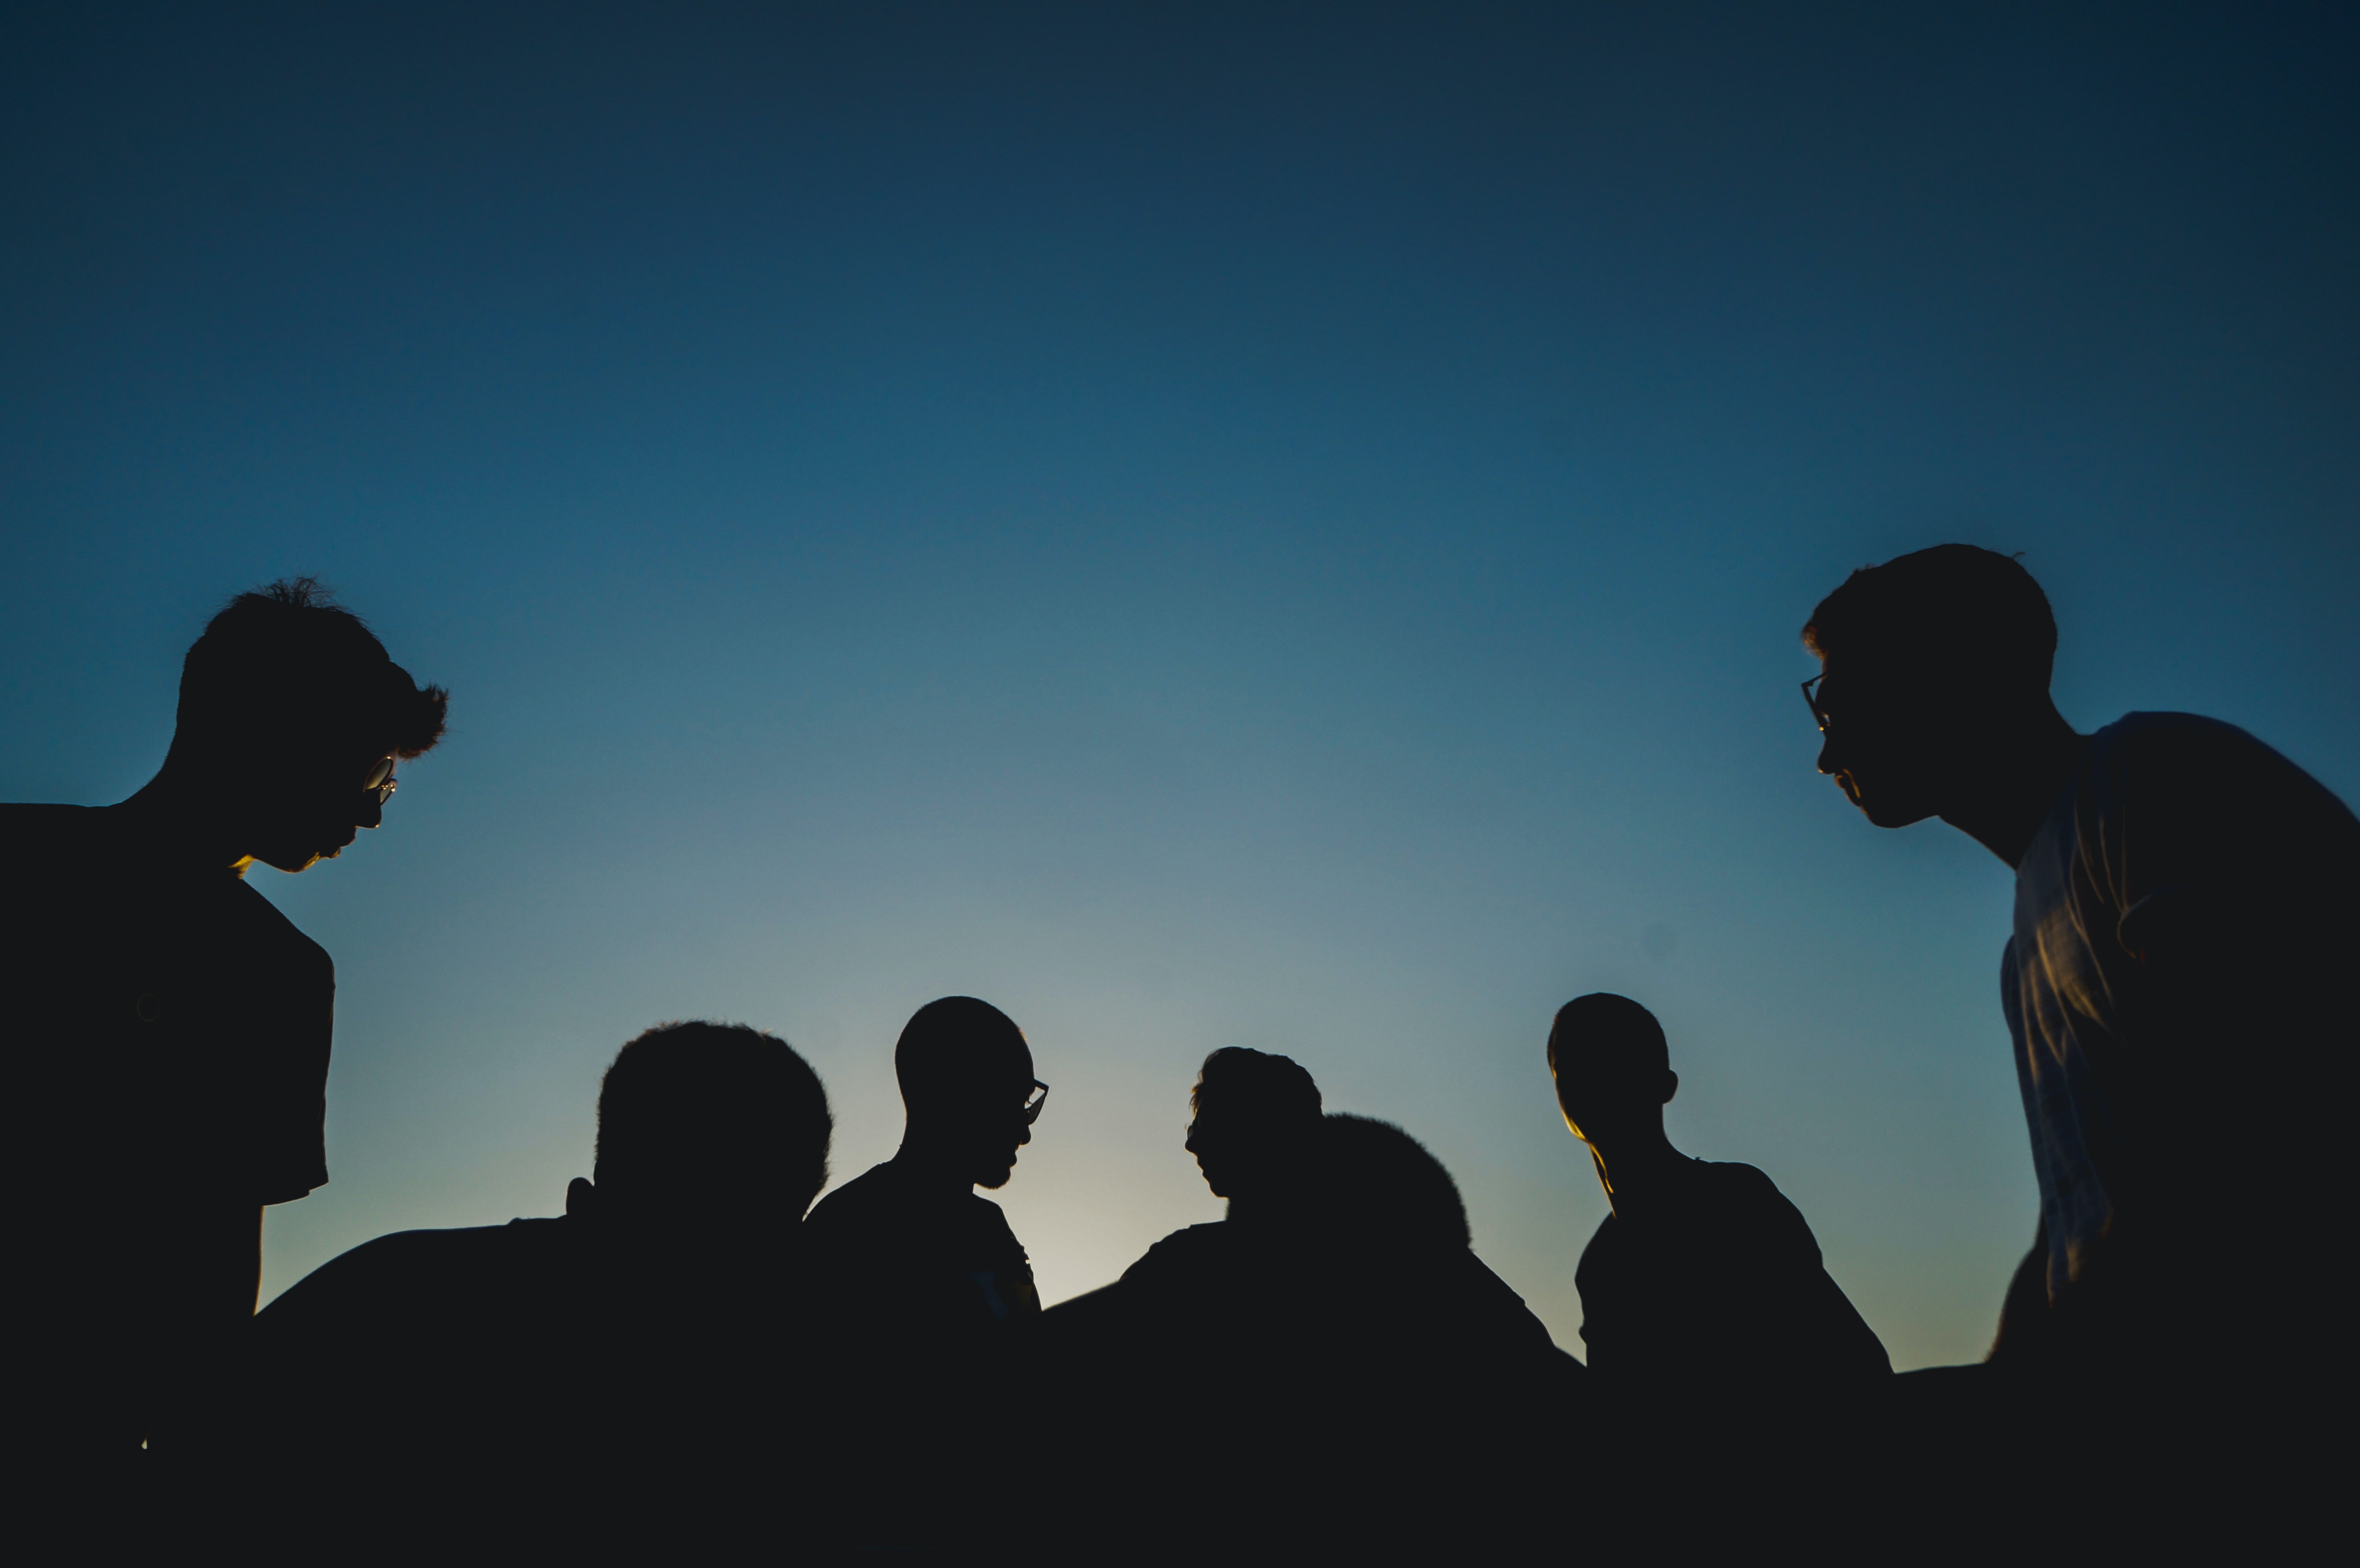 Silhouette of 7 people